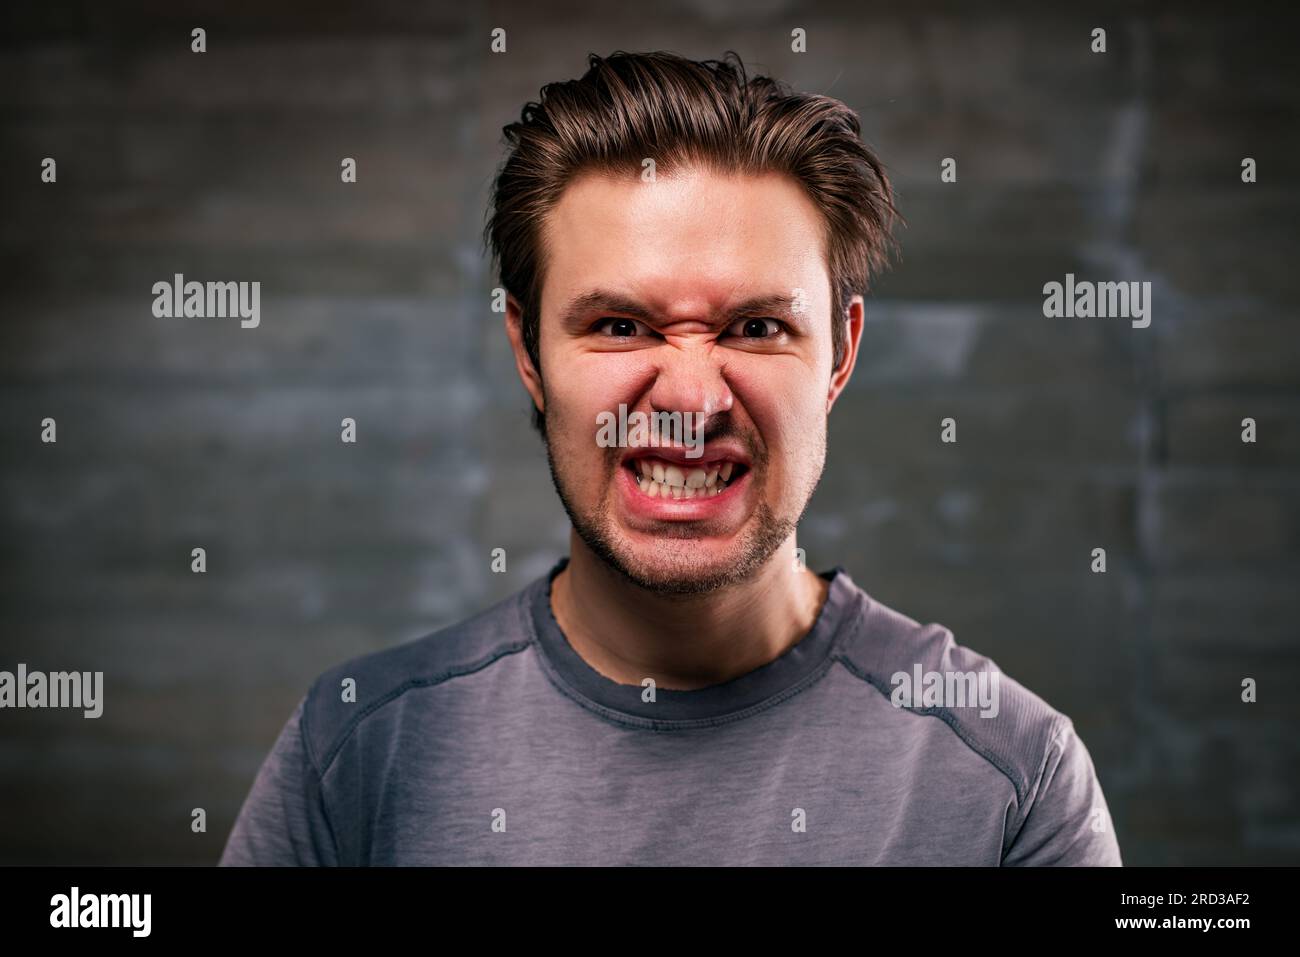 Young man angry portrait on gray wall background Stock Photo